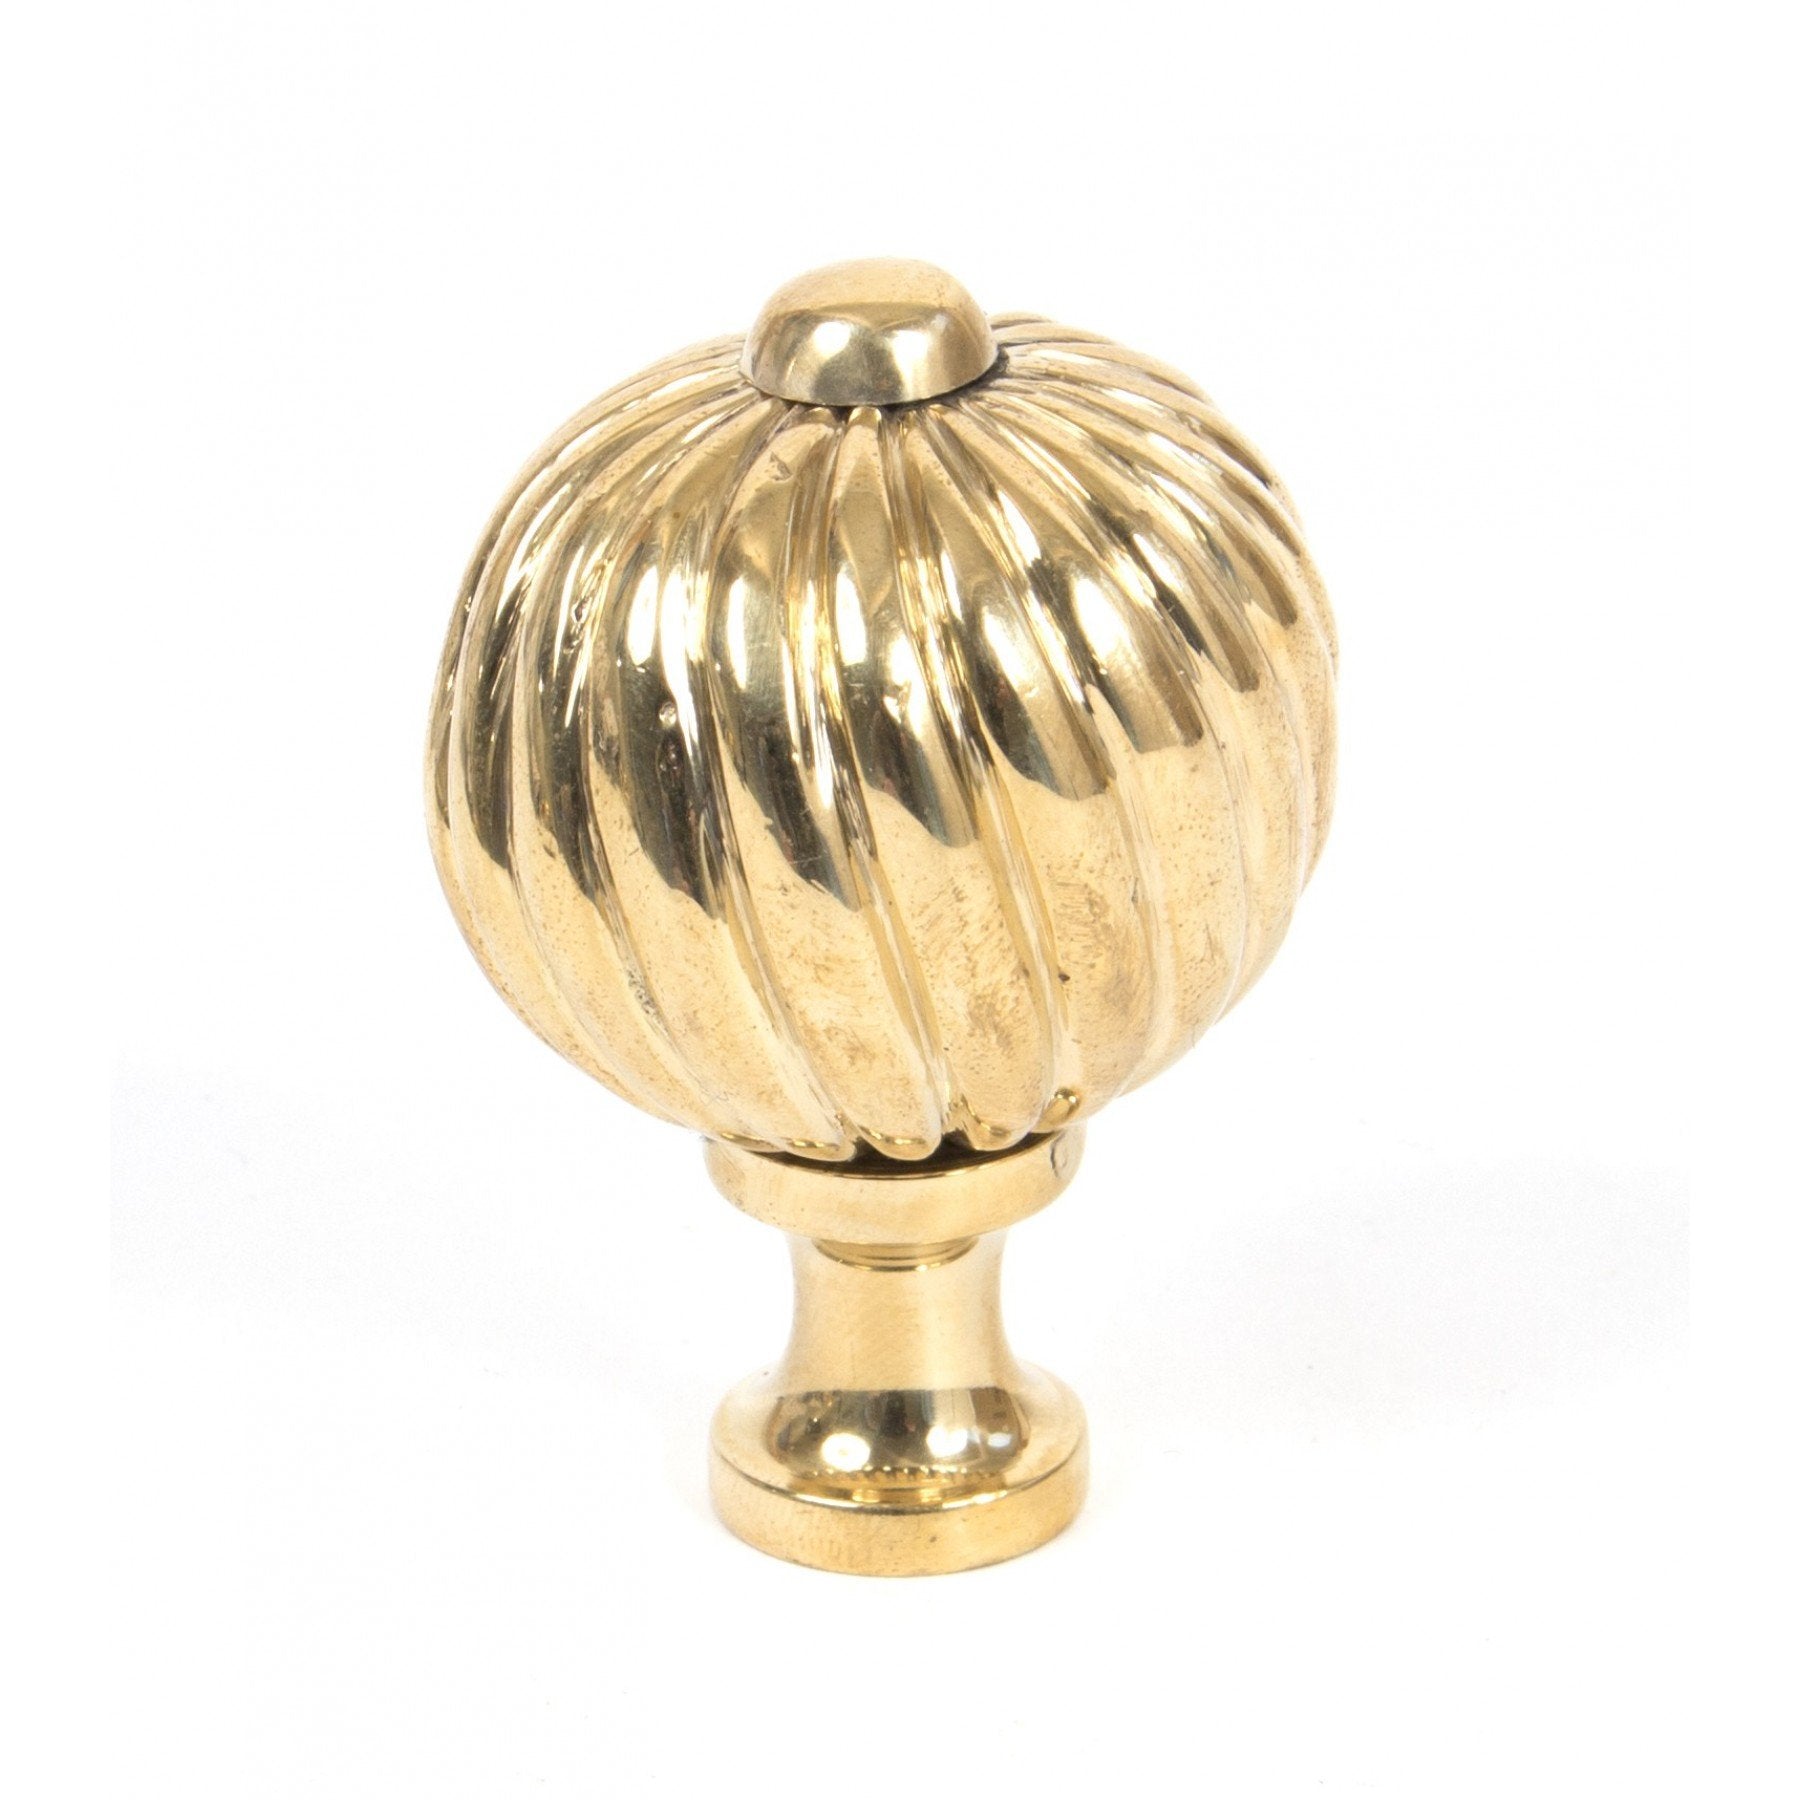 From the Anvil Polished Brass Spiral Cabinet Knob - Medium - No.42 Interiors